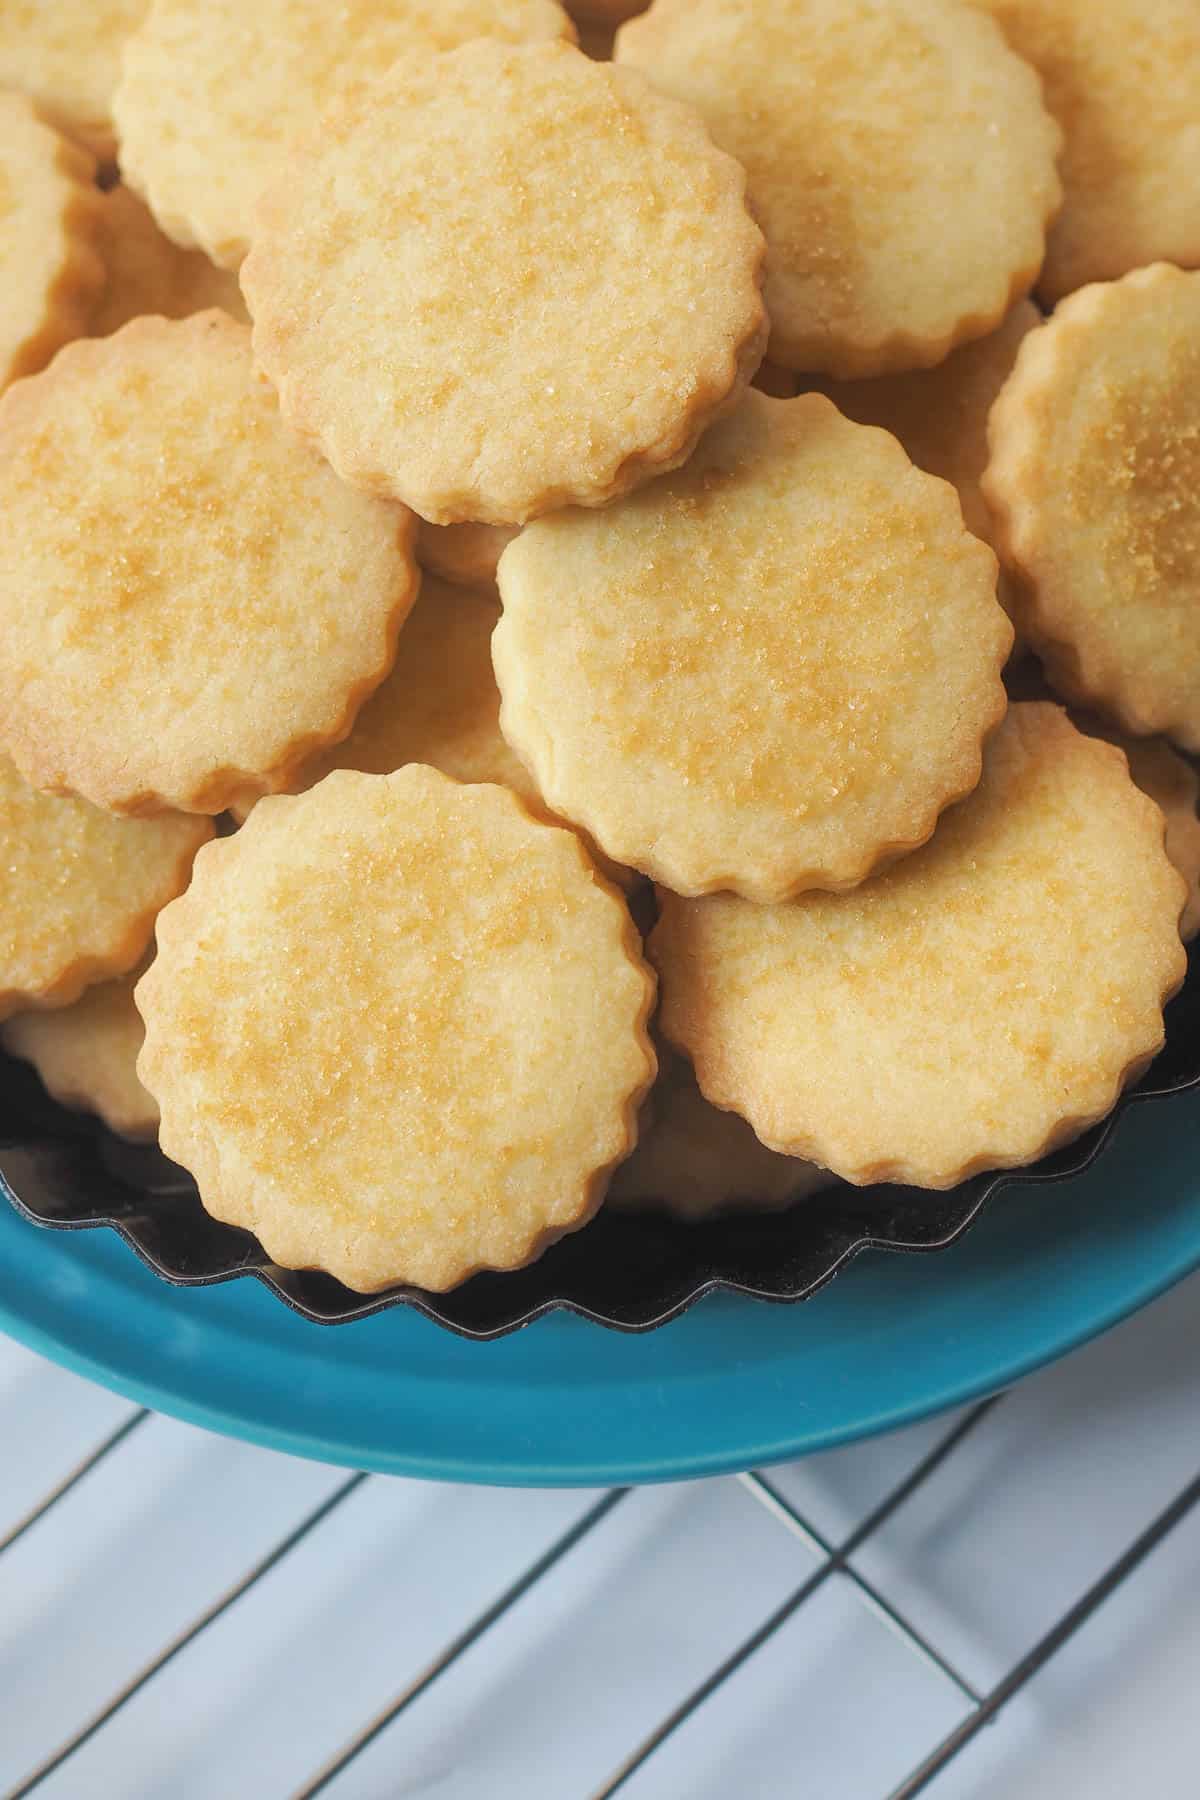 Scalloped cut out cookies in a blue plate.